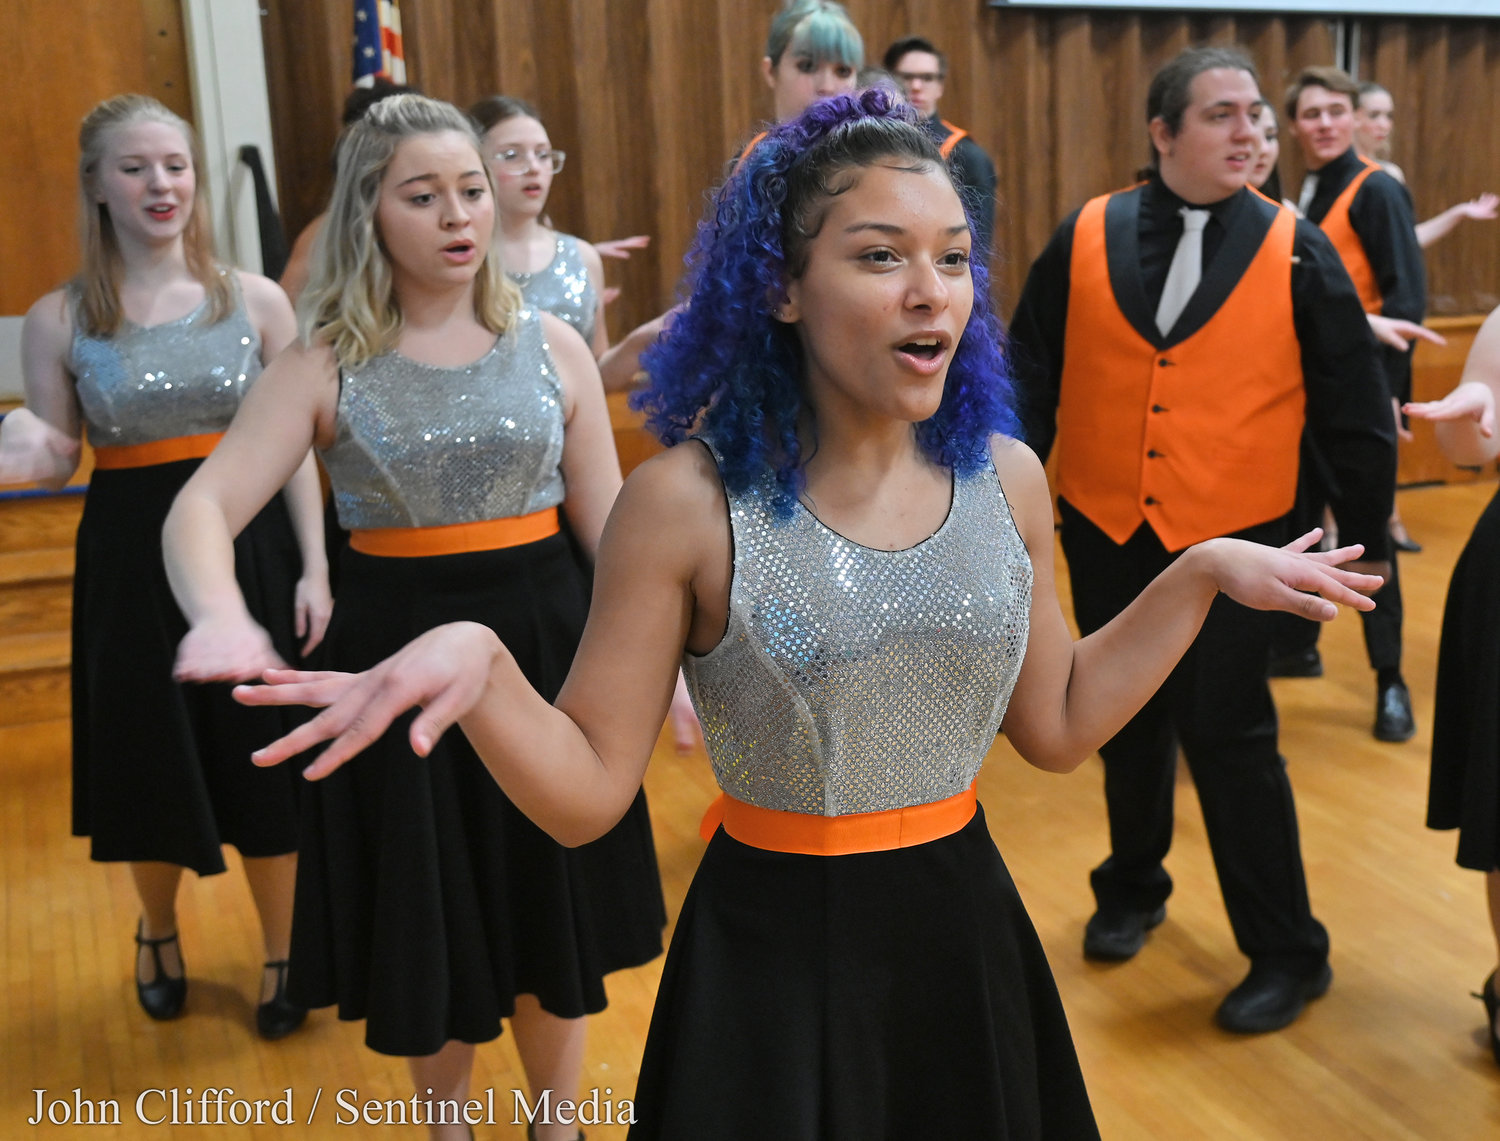 Rome Free Academy Rhapsody Show Choir member Alana DeJosie singing and dancing during the  performance at Clough School Friday, January 13, 2023.